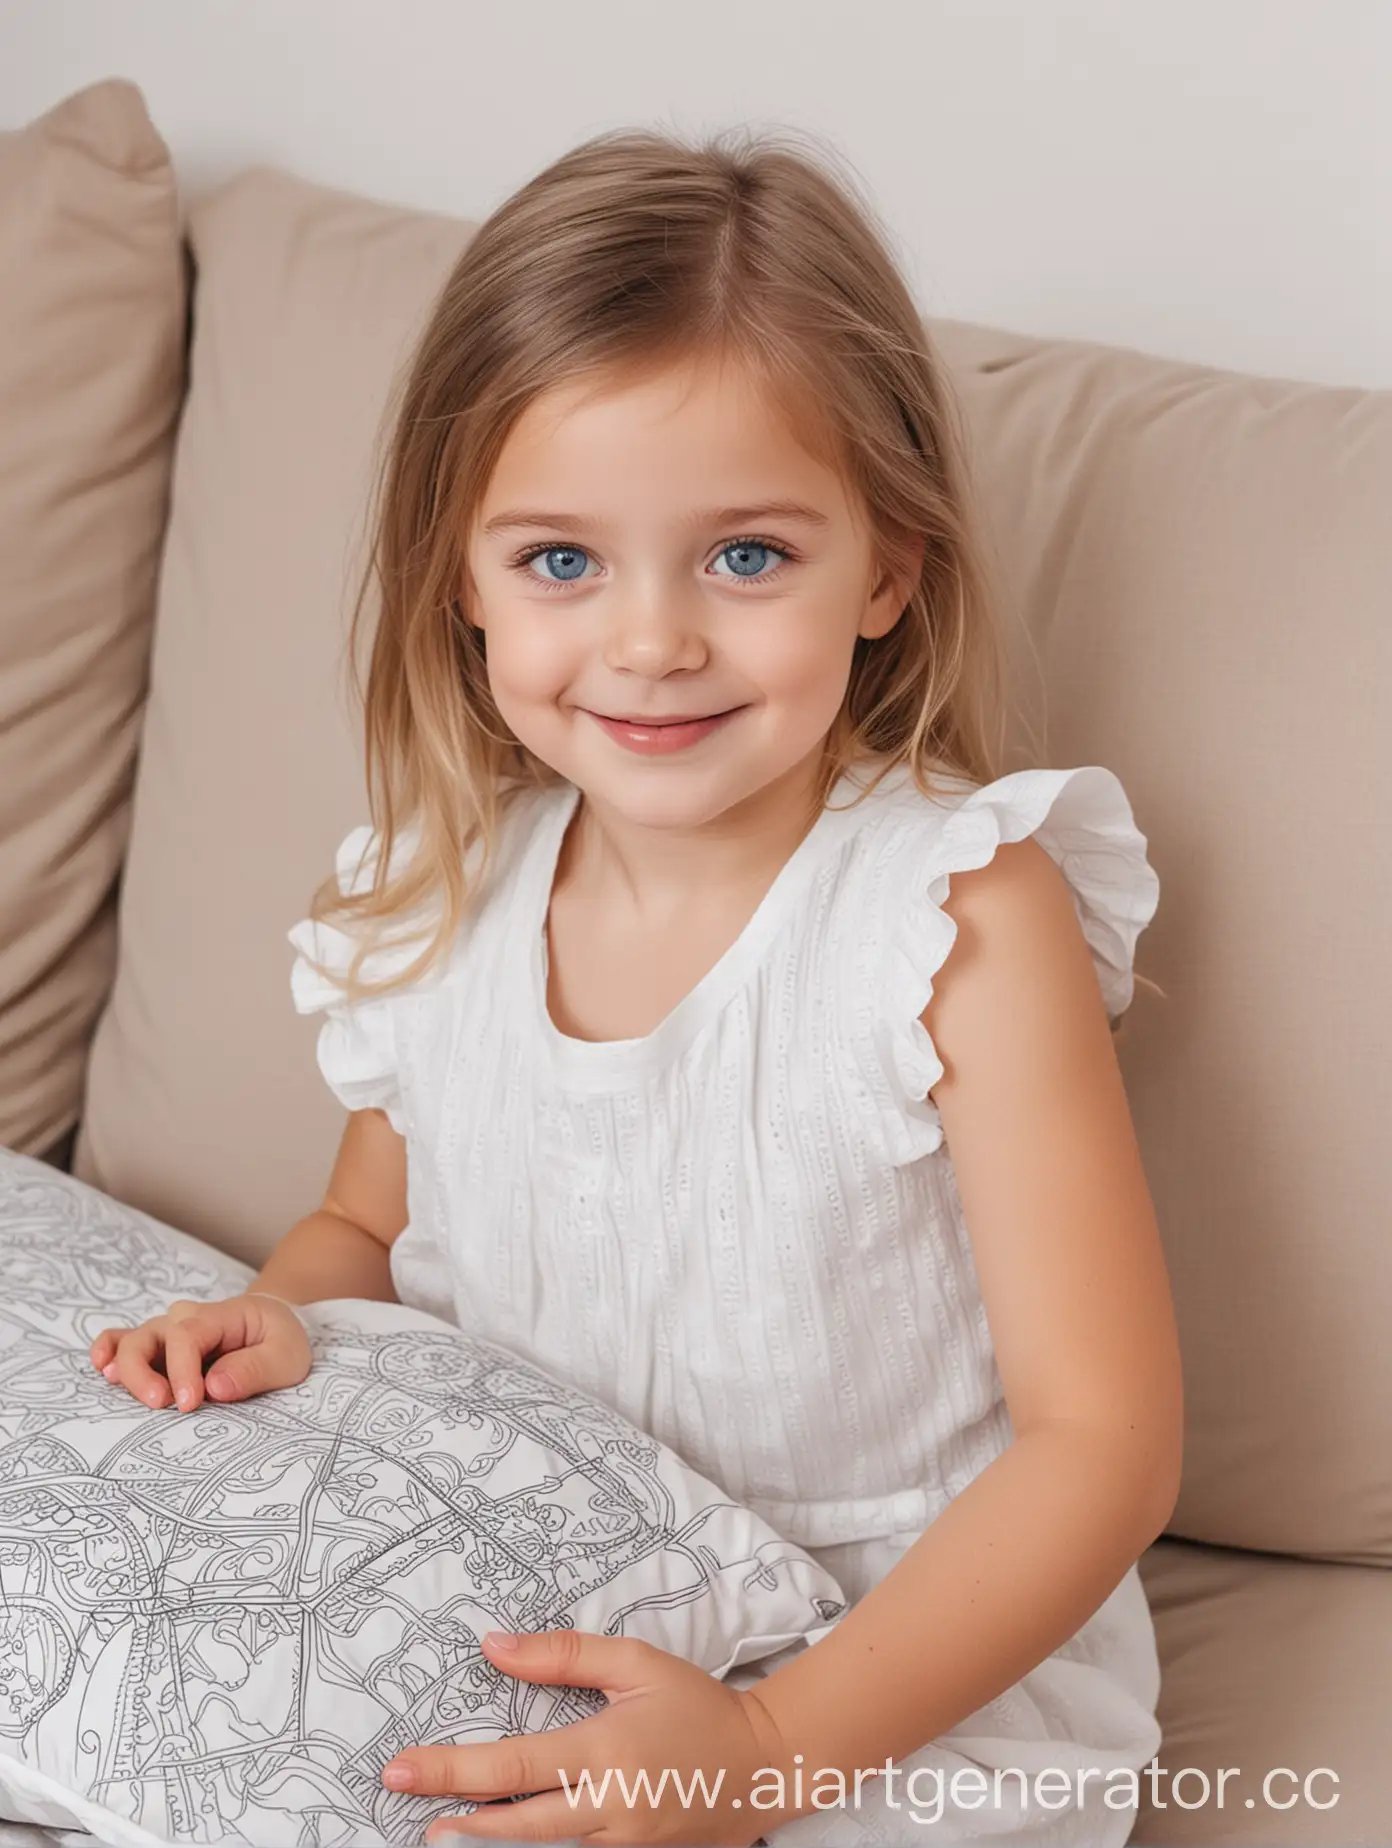 Smiling-4YearOld-Russian-Girl-with-Blue-Eyes-Coloring-on-Sofa